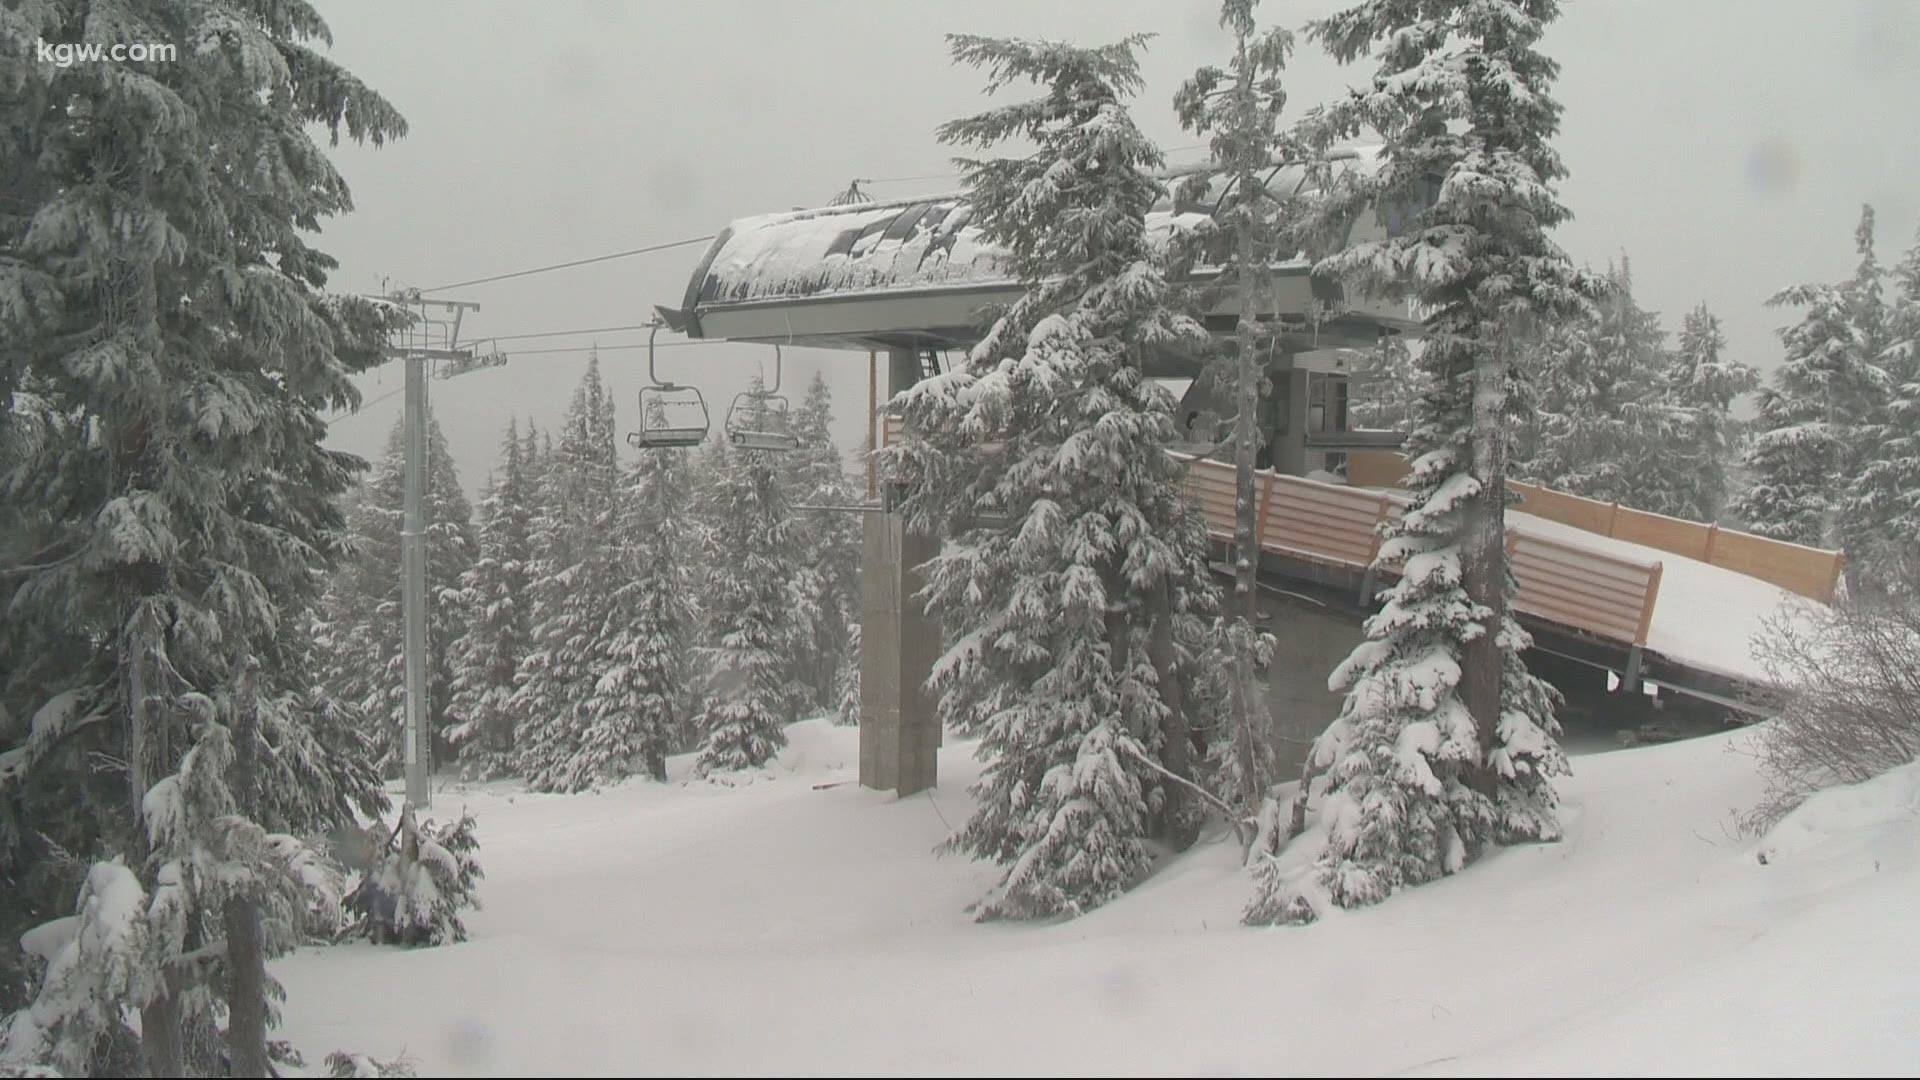 With several feet of snow expected on Mt. Hood over the next several days, ski resorts are hoping to open for the holiday weekend.